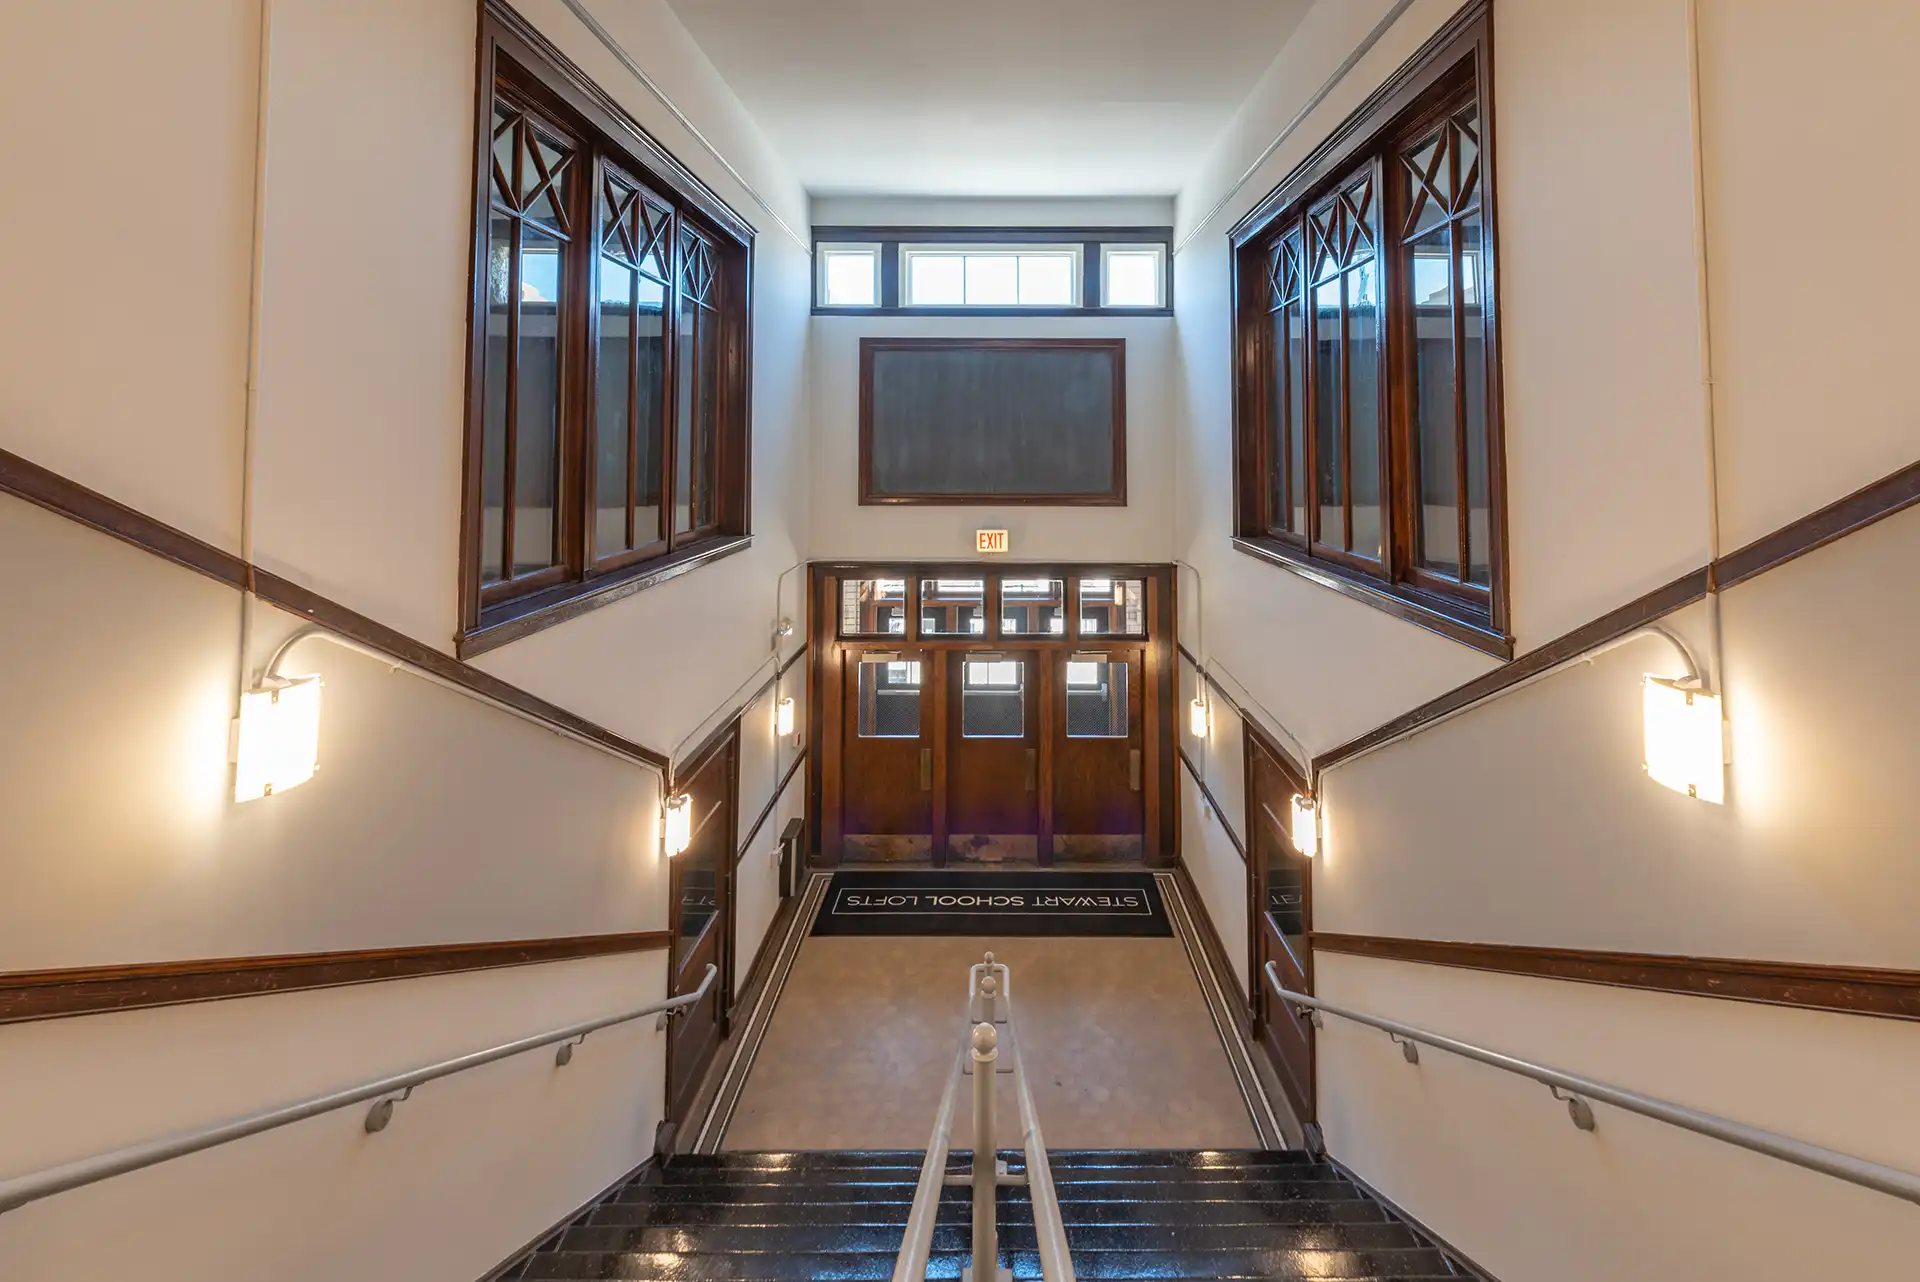 Stewart School Lofts lobby staircase with sconce lighting and dark wood framed windows.